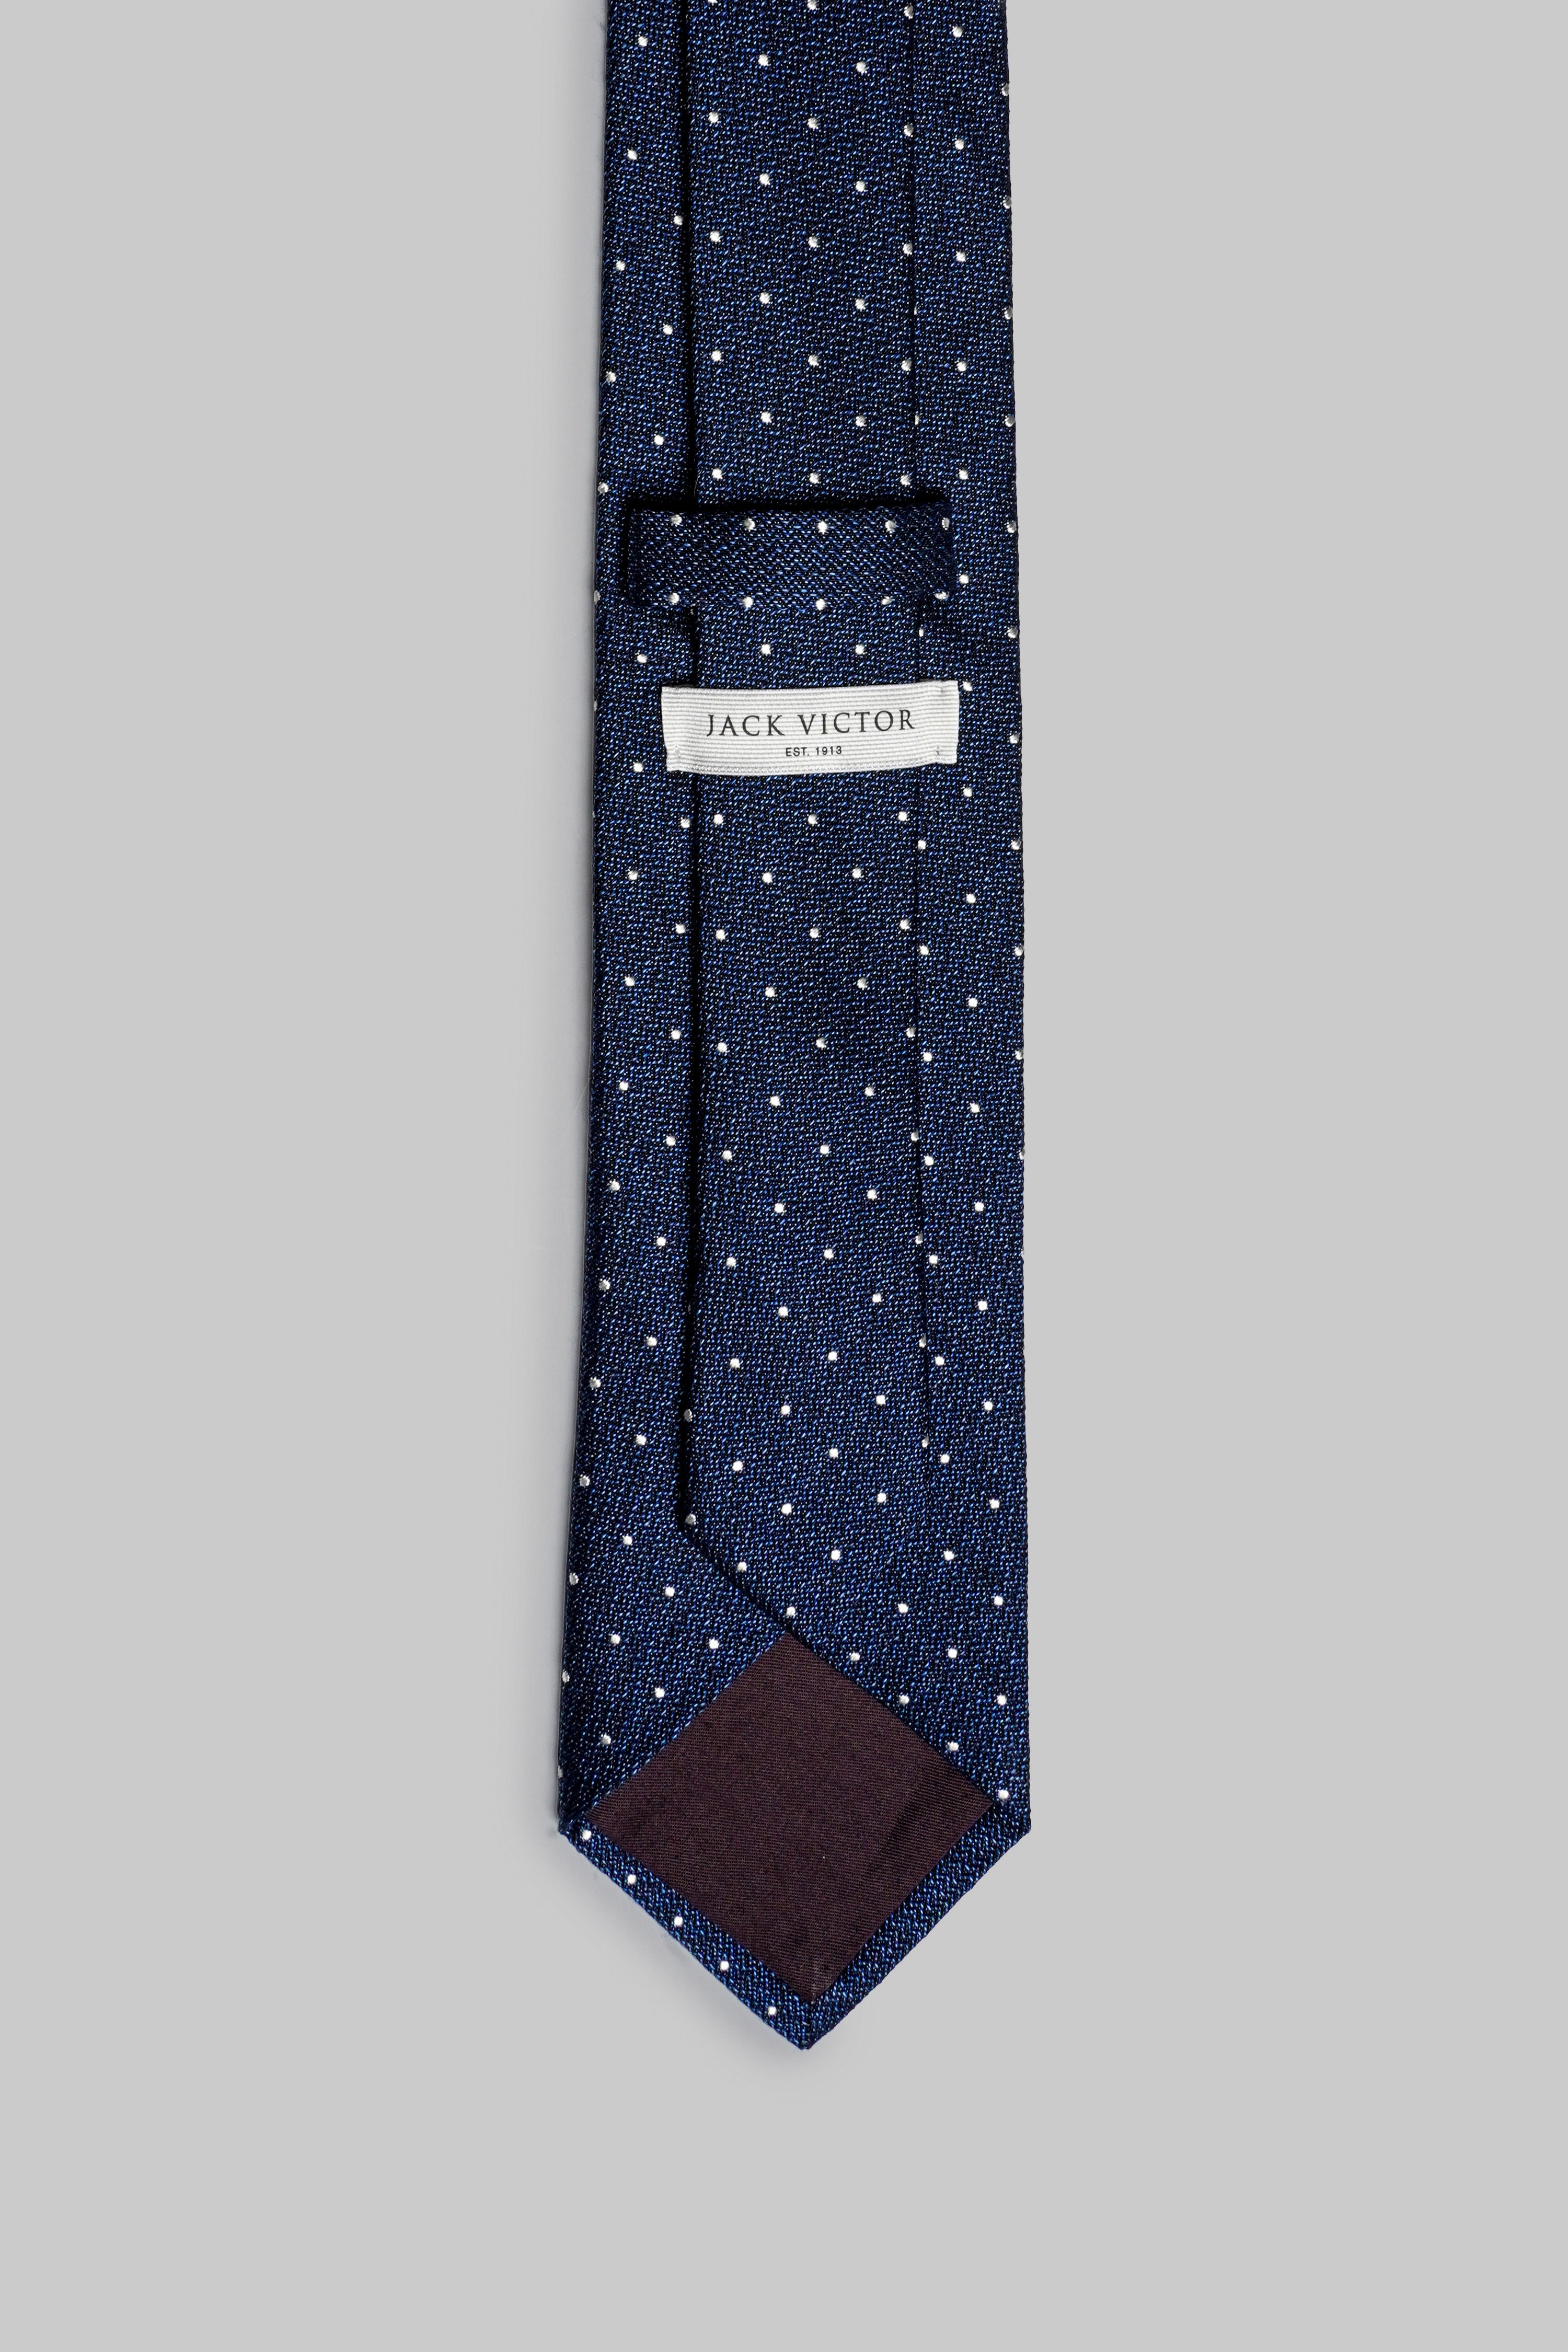 Alt view 2 Pindot Woven Tie in Palace Blue